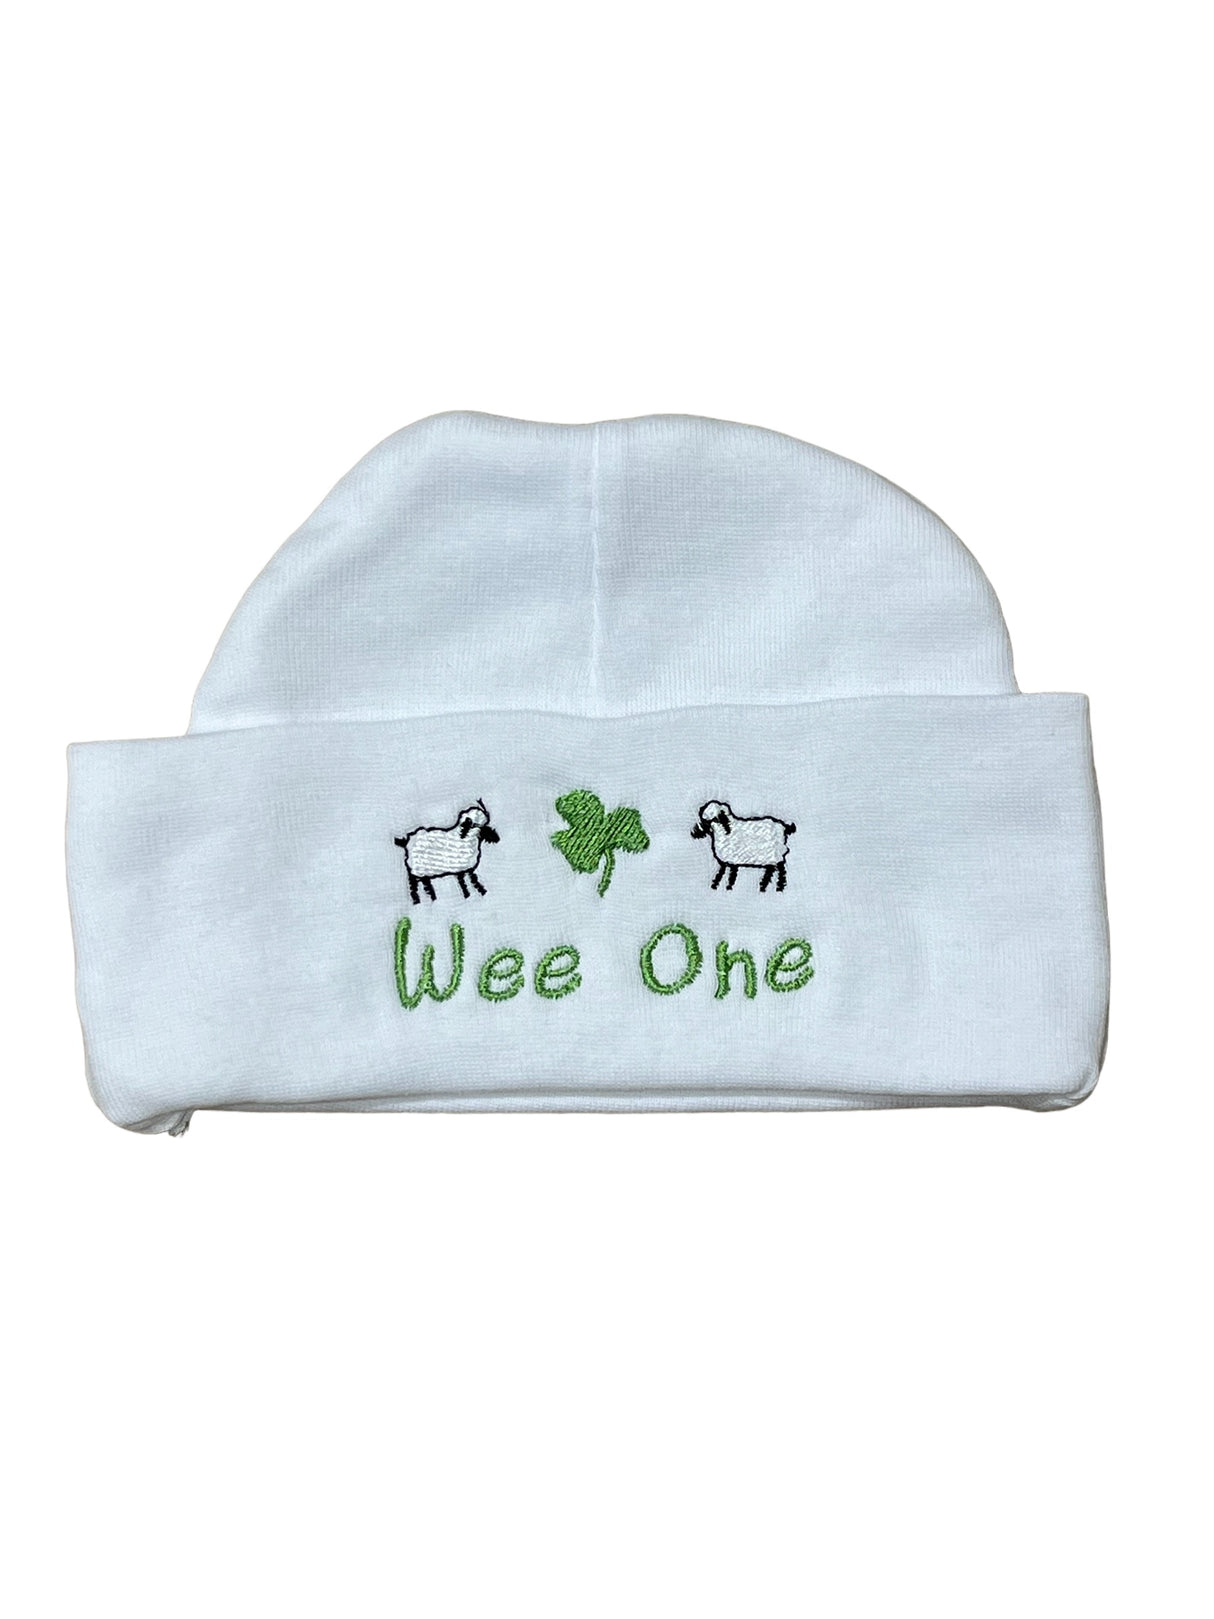 Wee One Baby Knit Cap